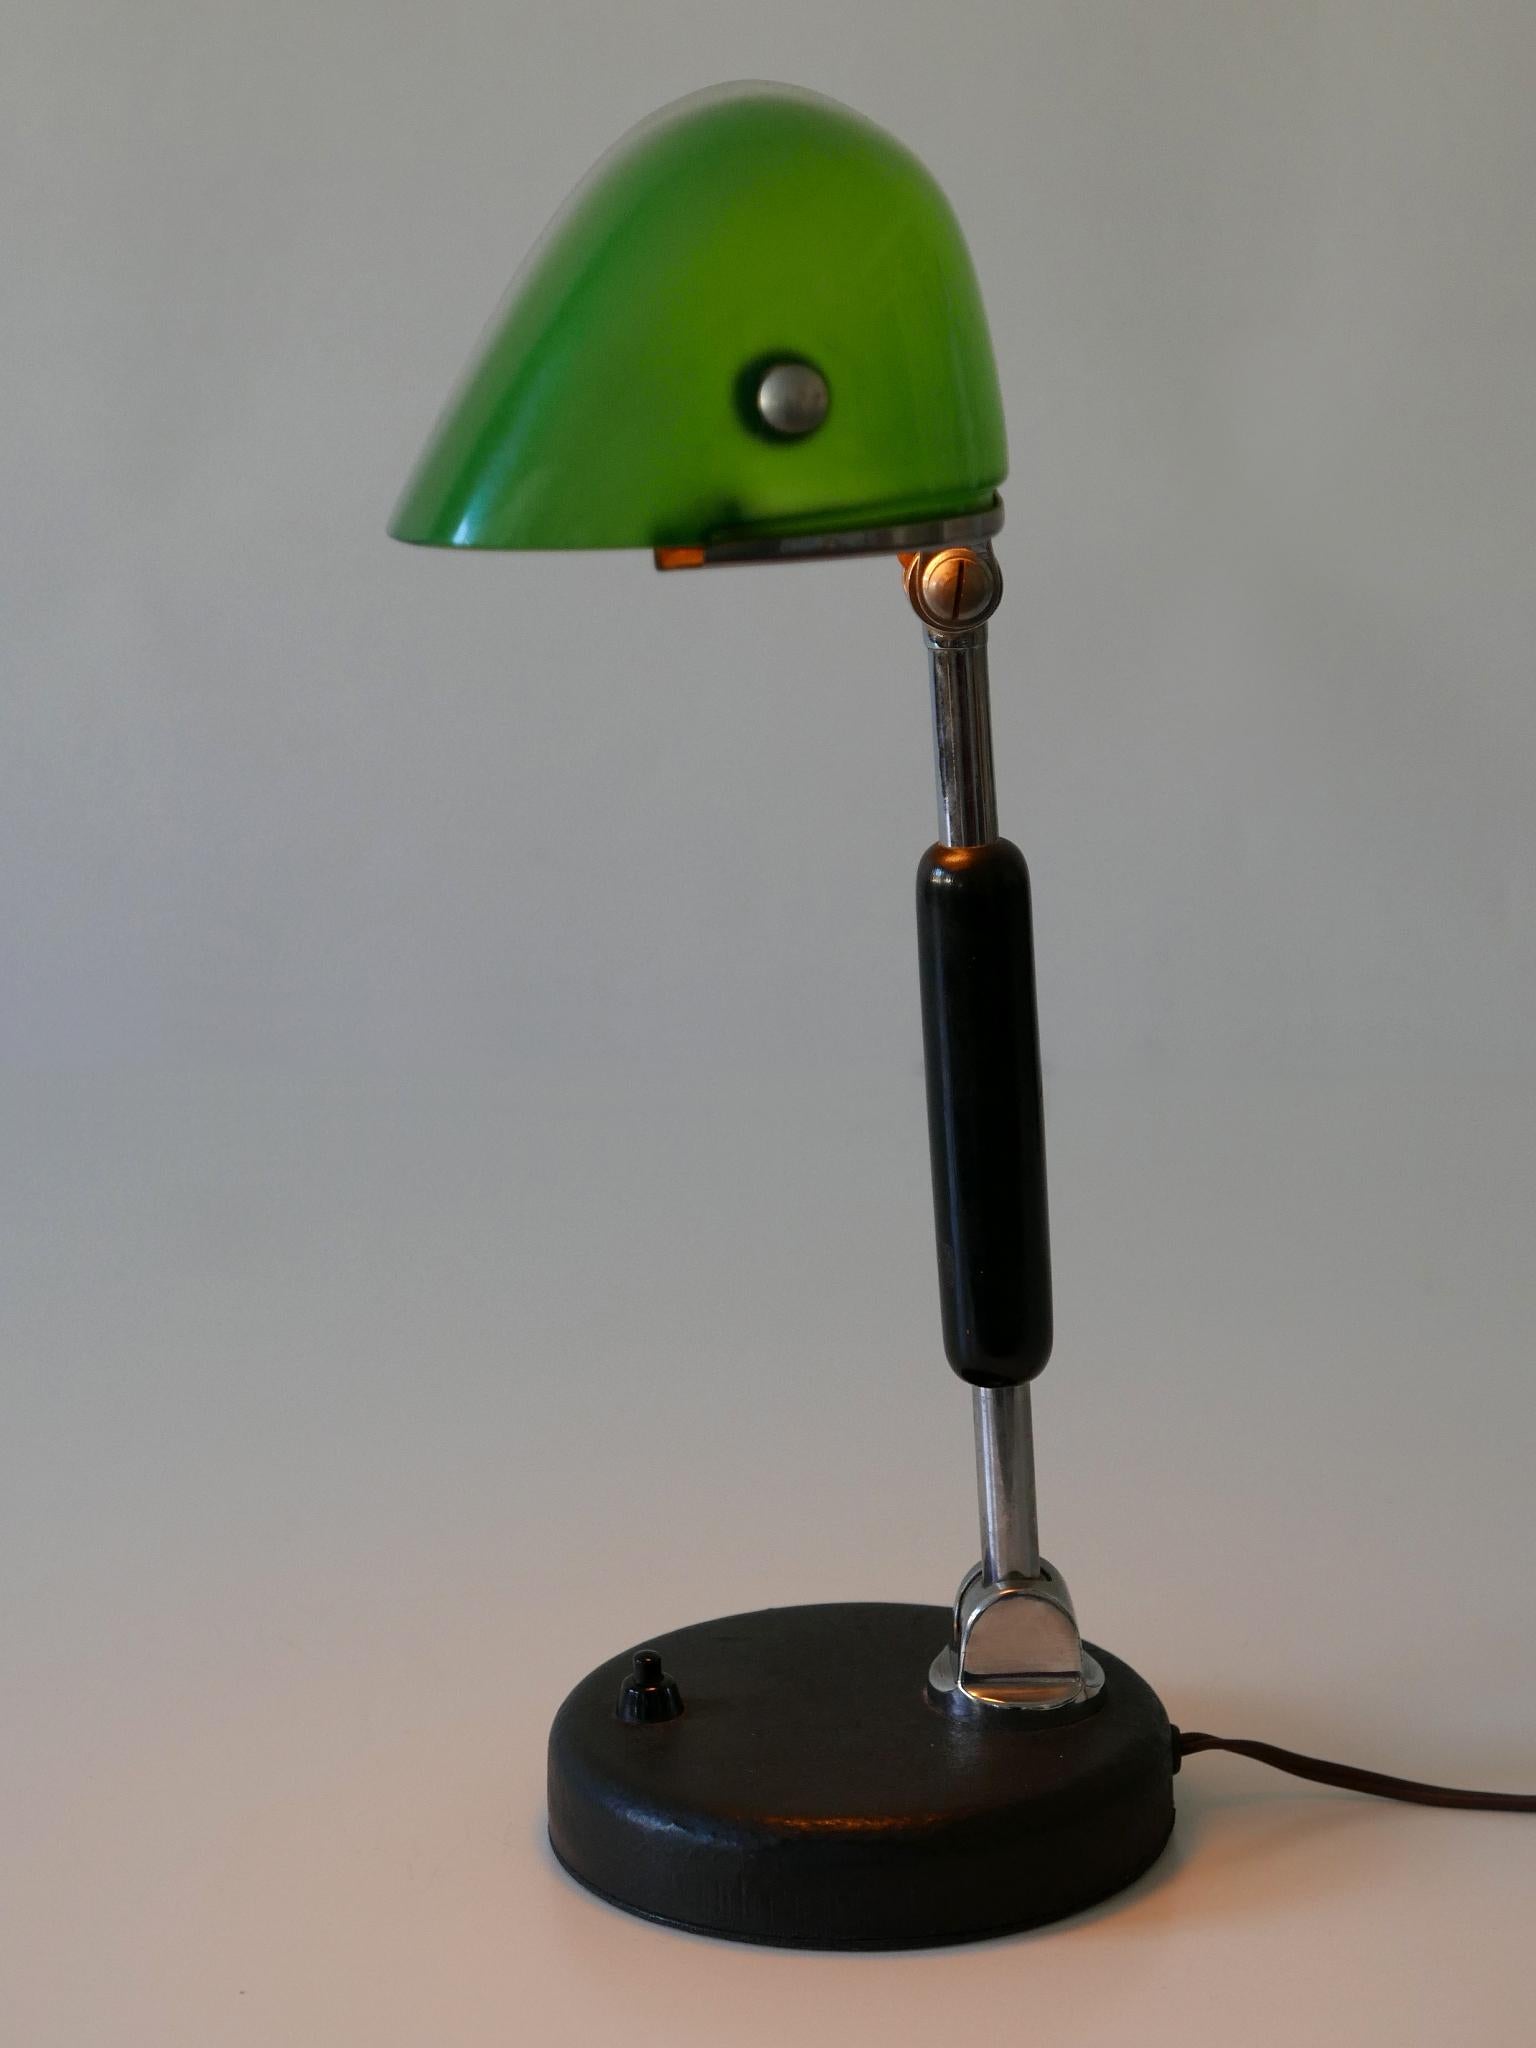 Exceptional Bauhaus Bankers Table Lamp with Original Green Glass, 1930s, Germany 1